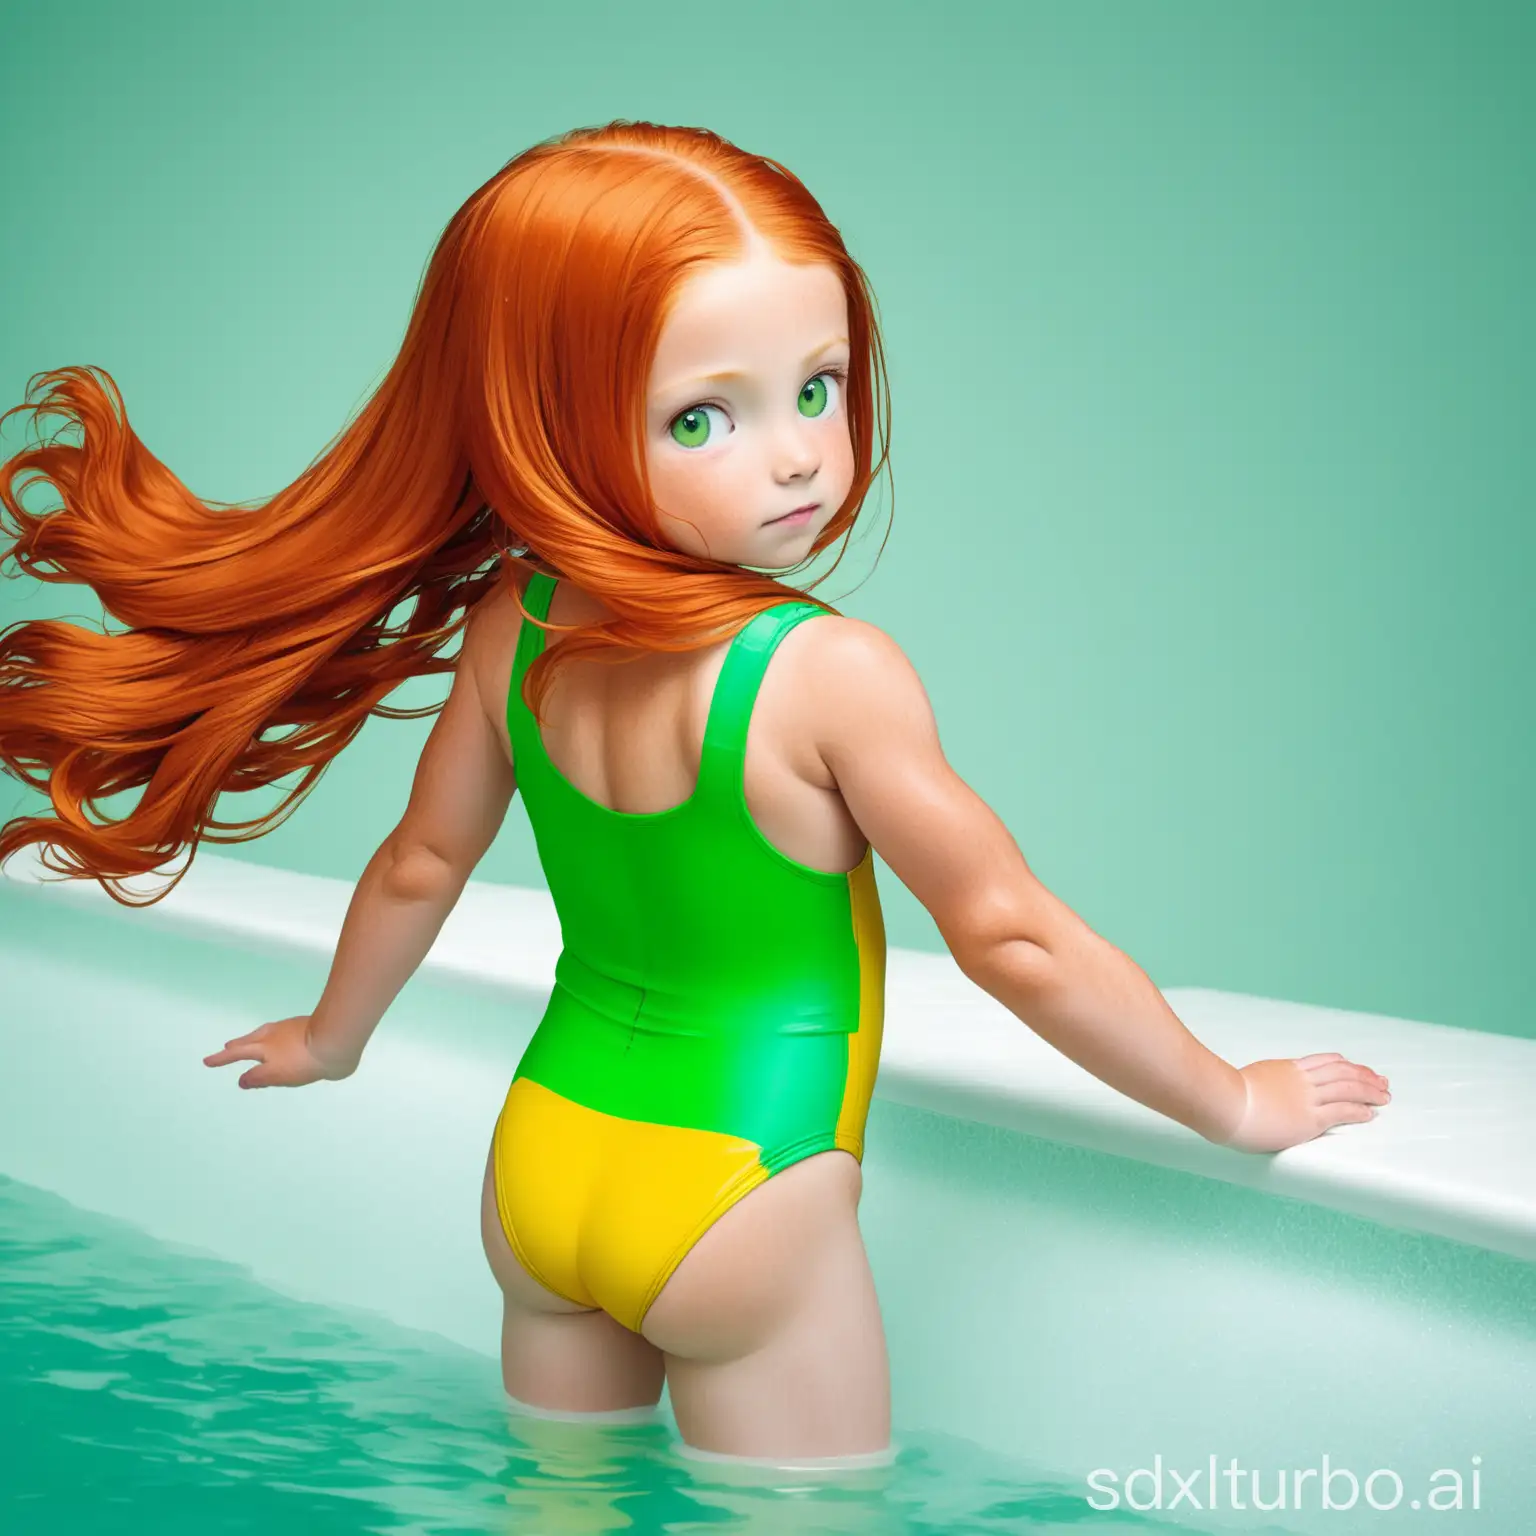 Vibrant-Bathing-Suit-Muscular-8YearOld-Girl-with-Long-Ginger-Hair-and-Green-Eyes